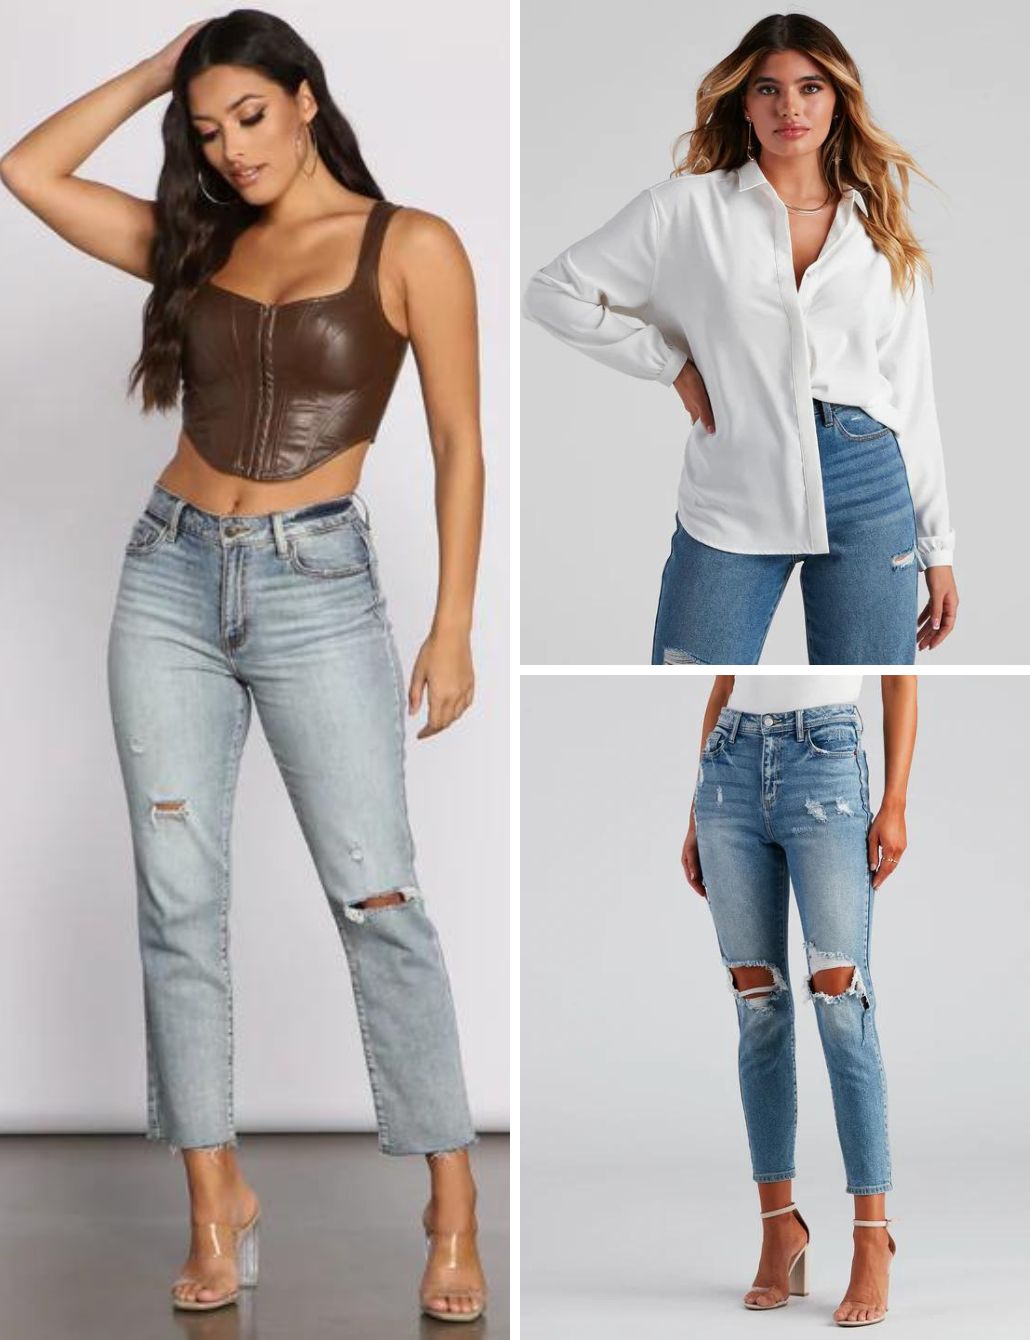 Jeans with Bustier Top Outfits (9 ideas & outfits)